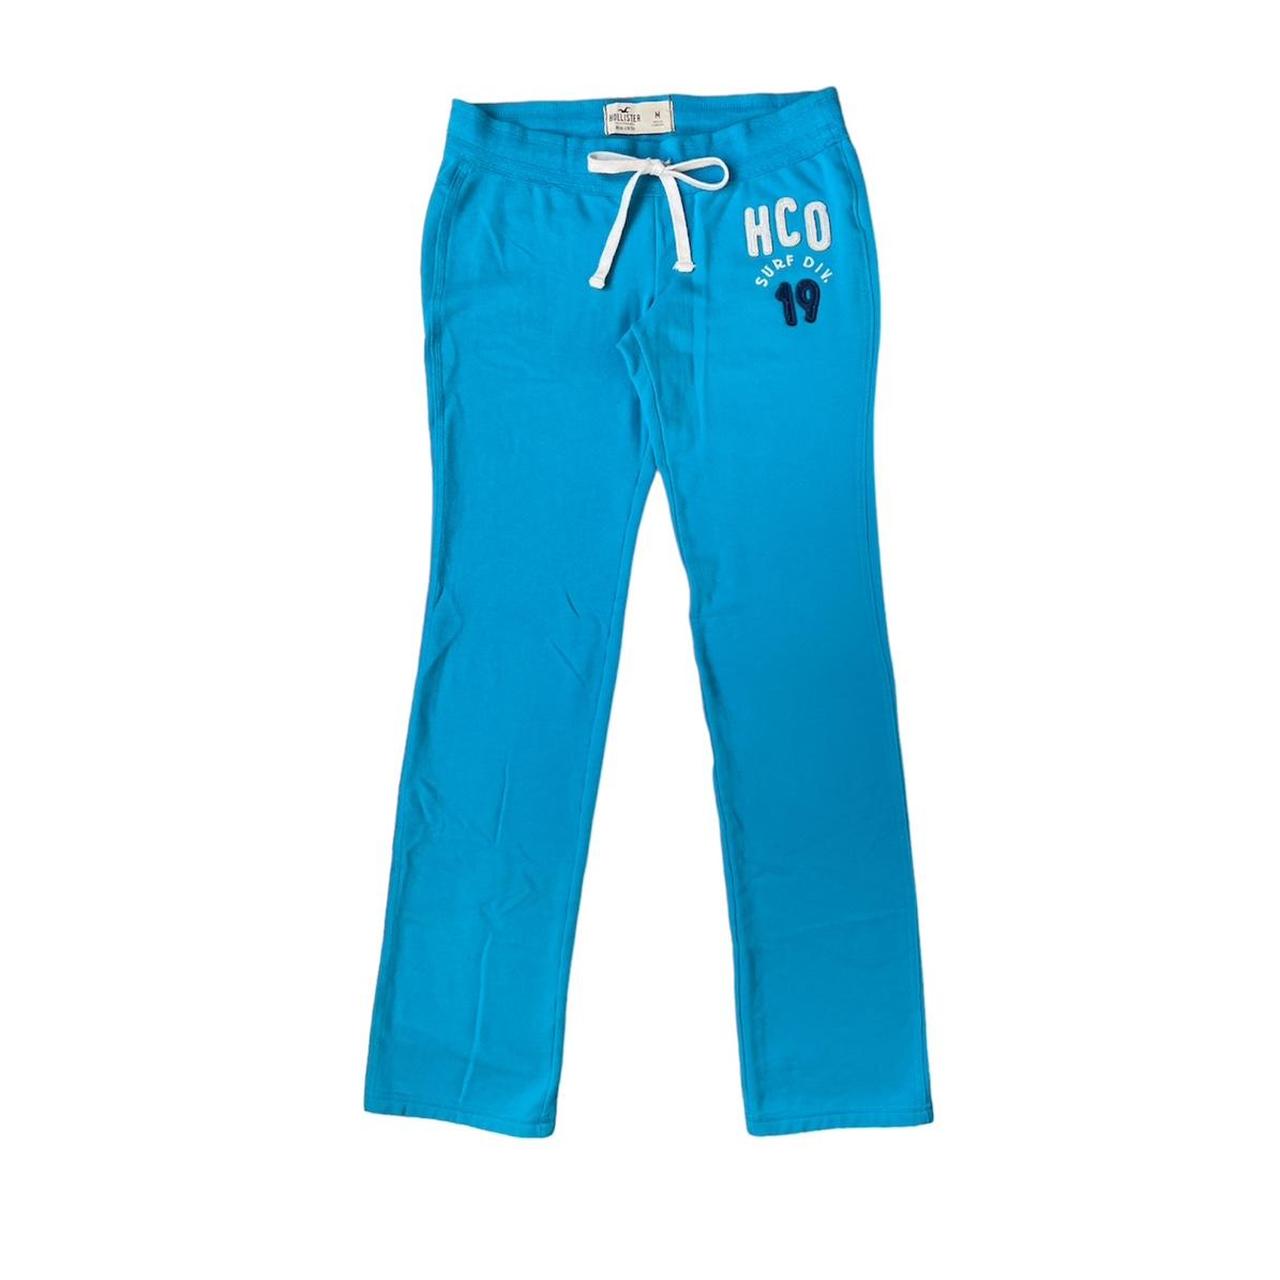 Hollister Sweatpants Blue Size M - $19 (62% Off Retail) - From